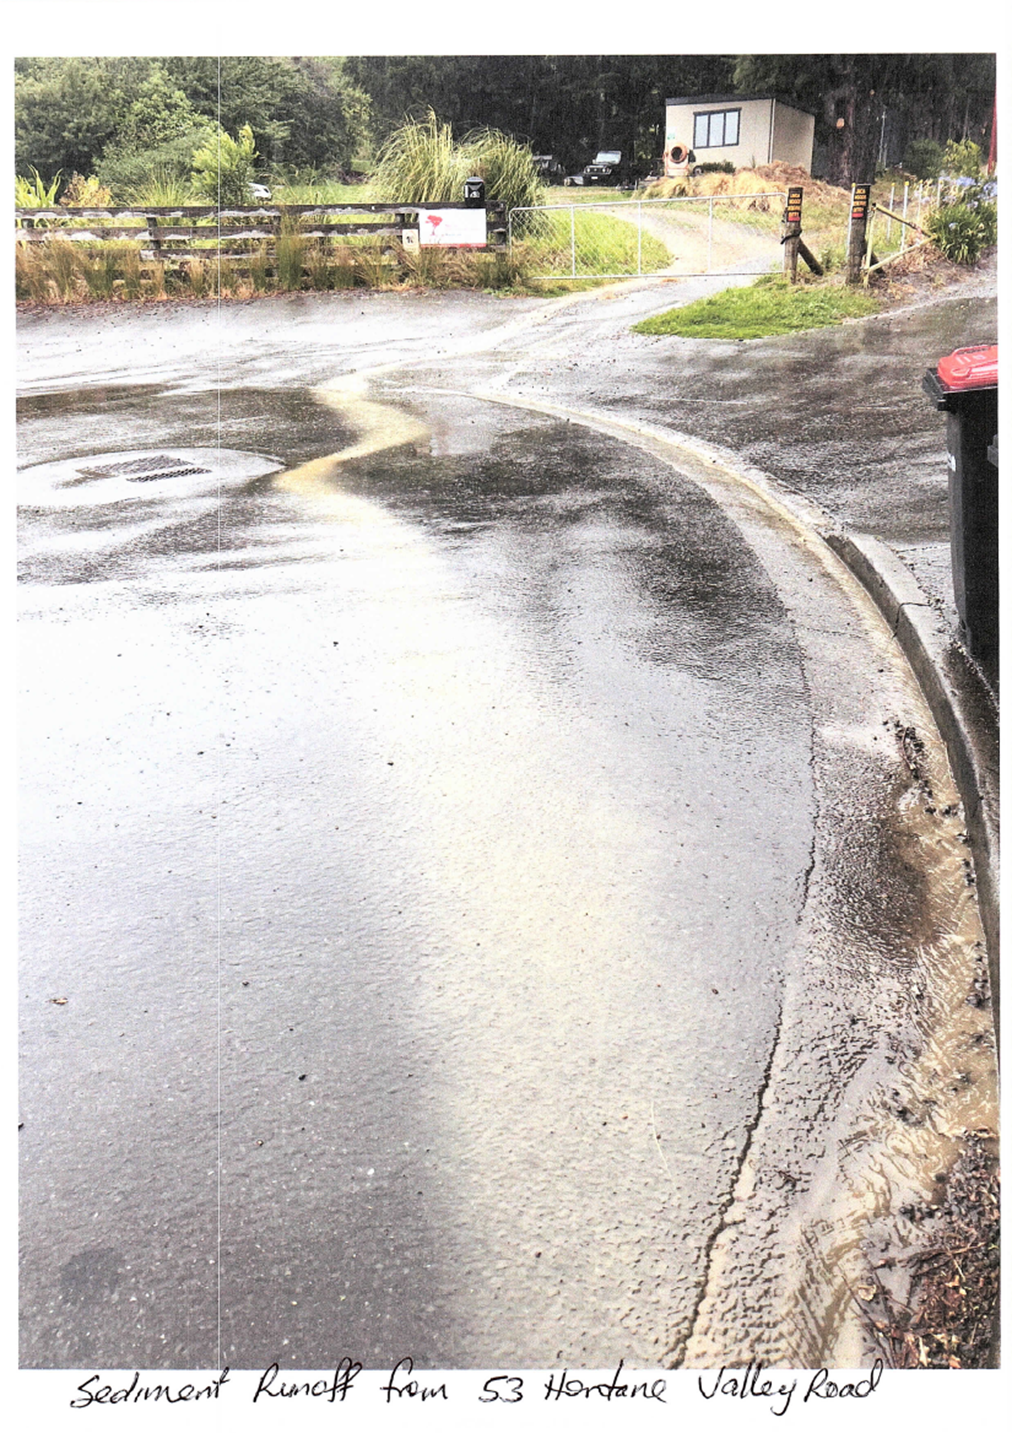 A wet road with a sign and a fence

Description automatically generated with medium confidence